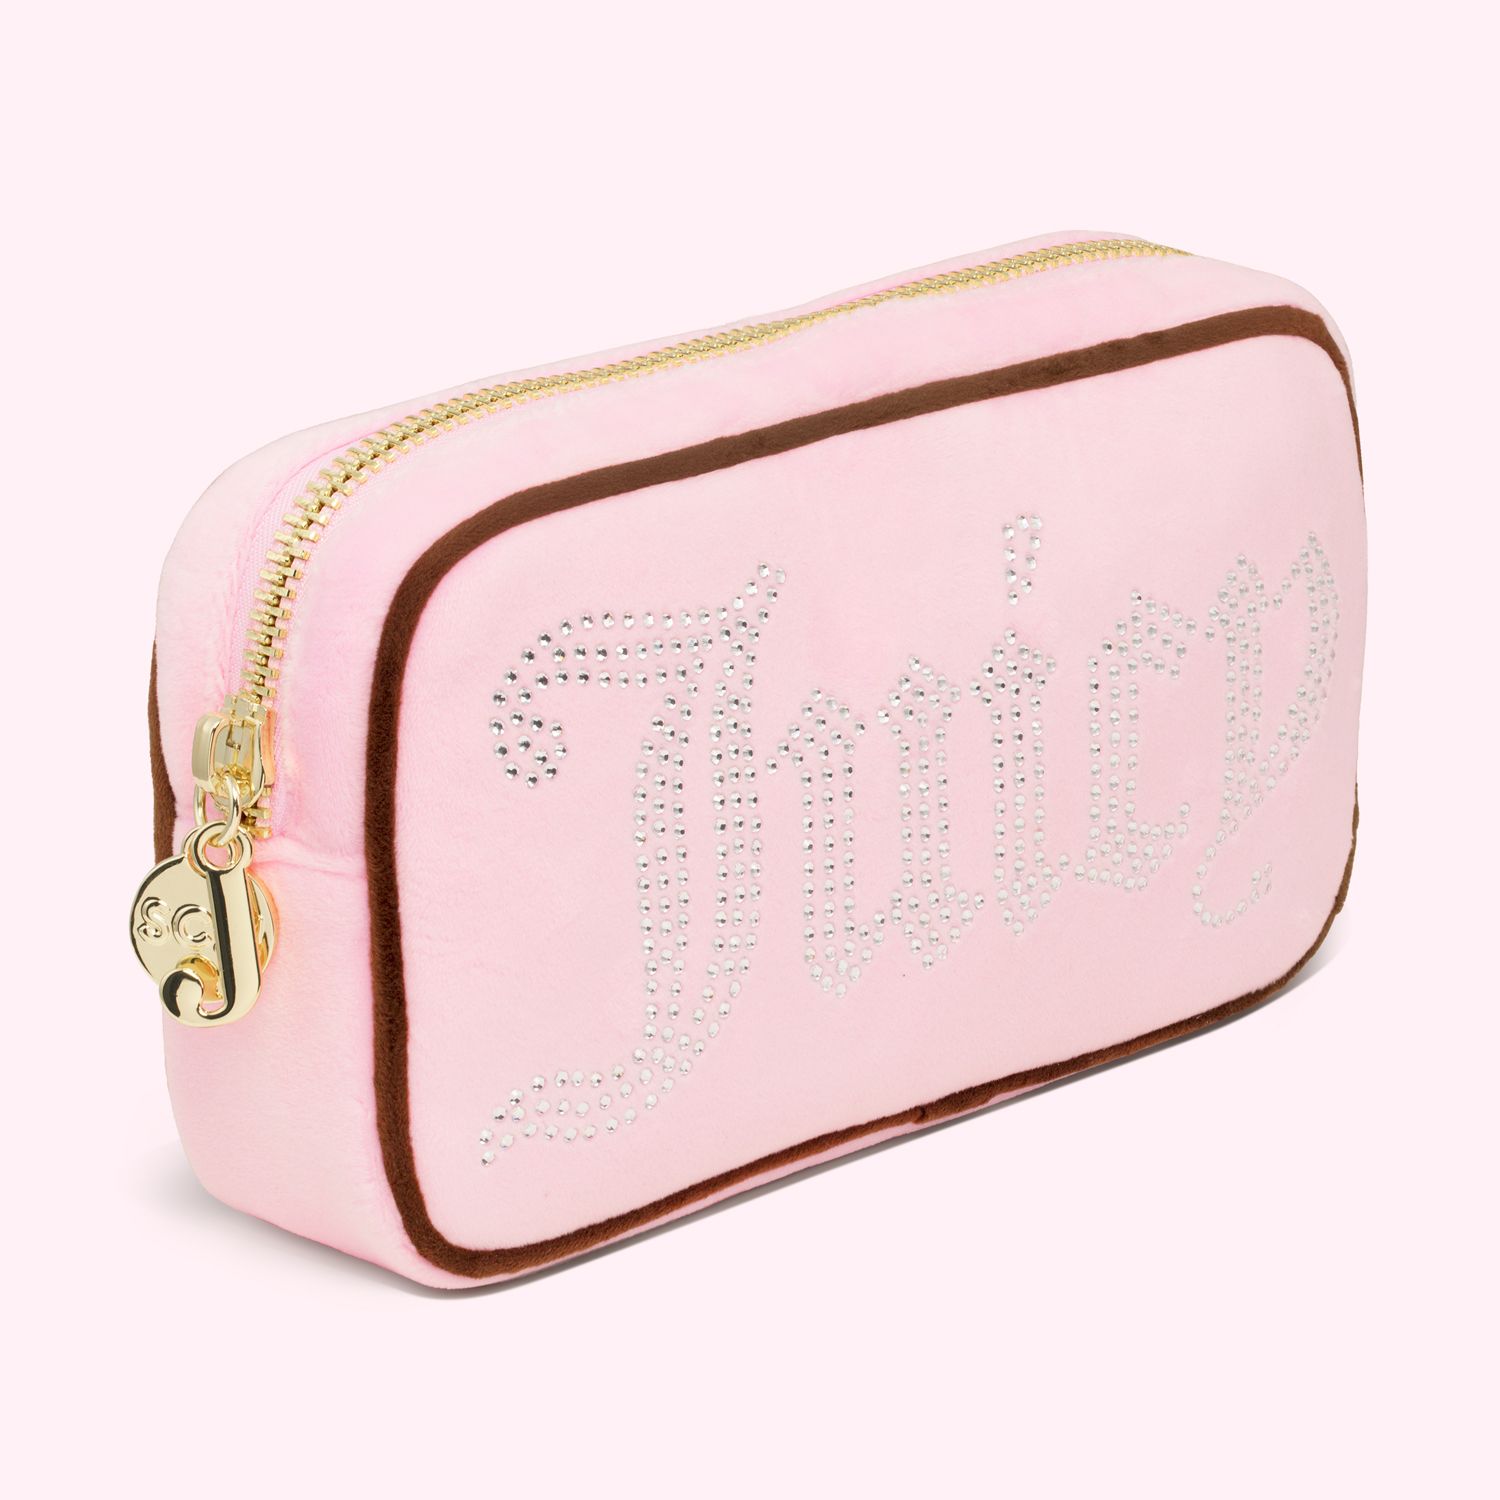 Juicy Couture Embellished Small Pouch | Stoney Clover Lane | Stoney Clover Lane